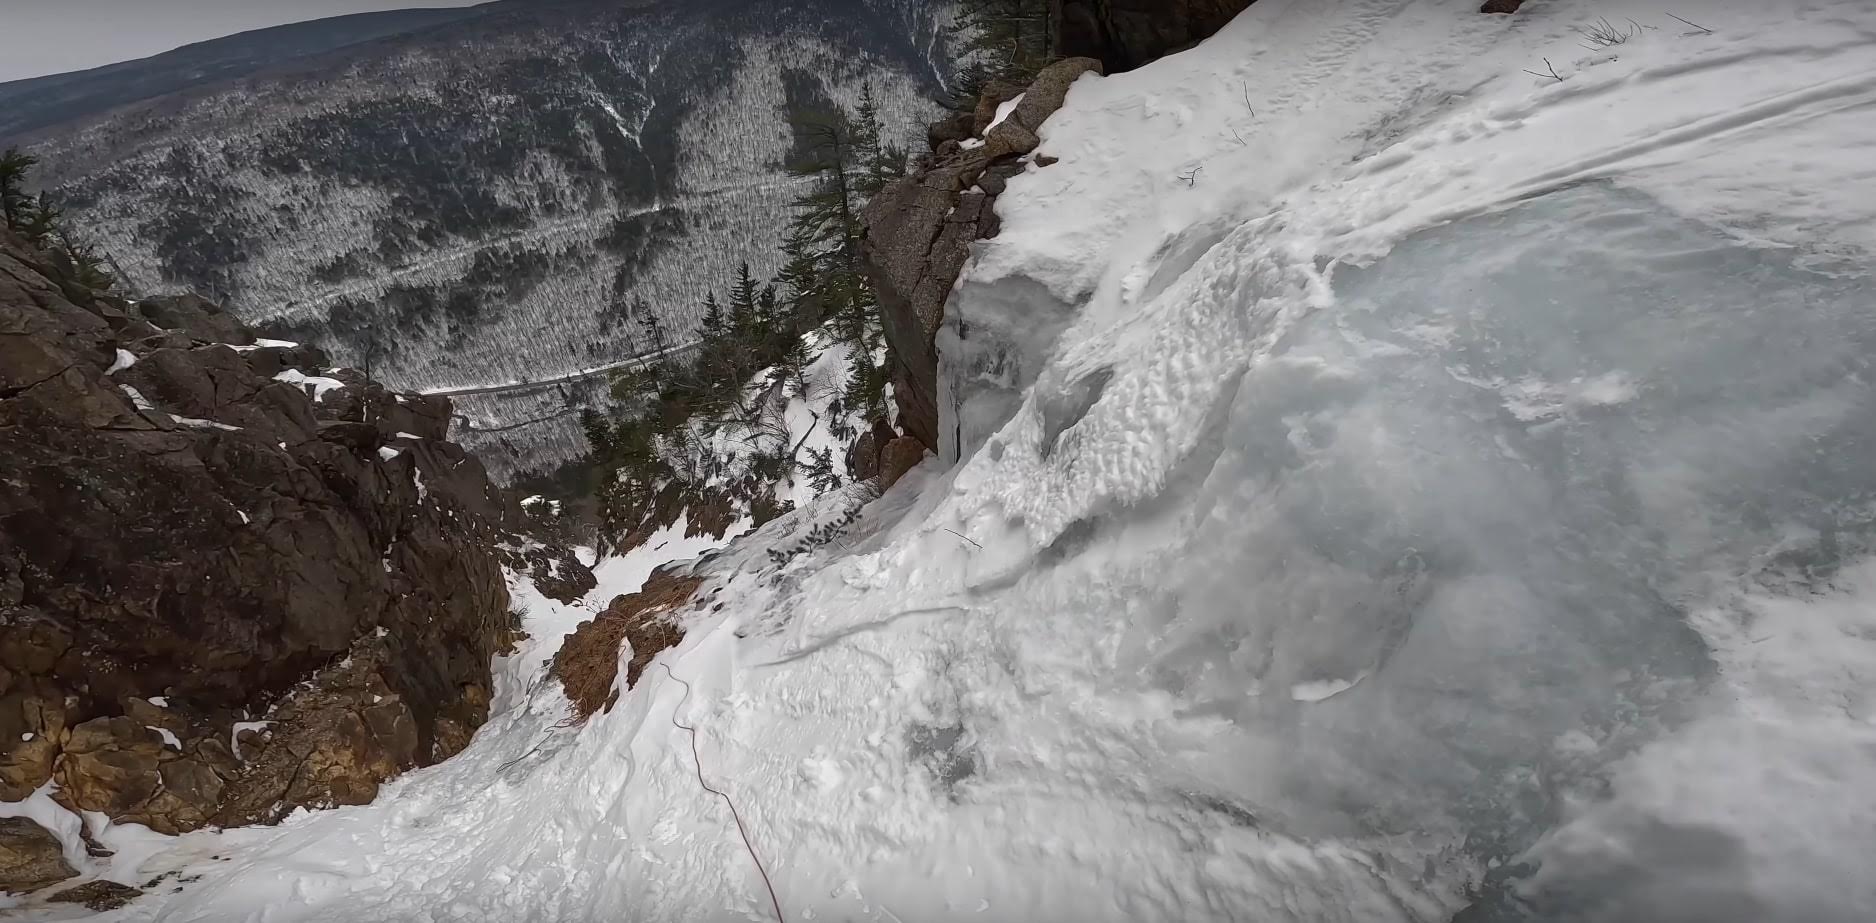 Skiing The Nearly Impossible Shoestring Gully In New Hampshire